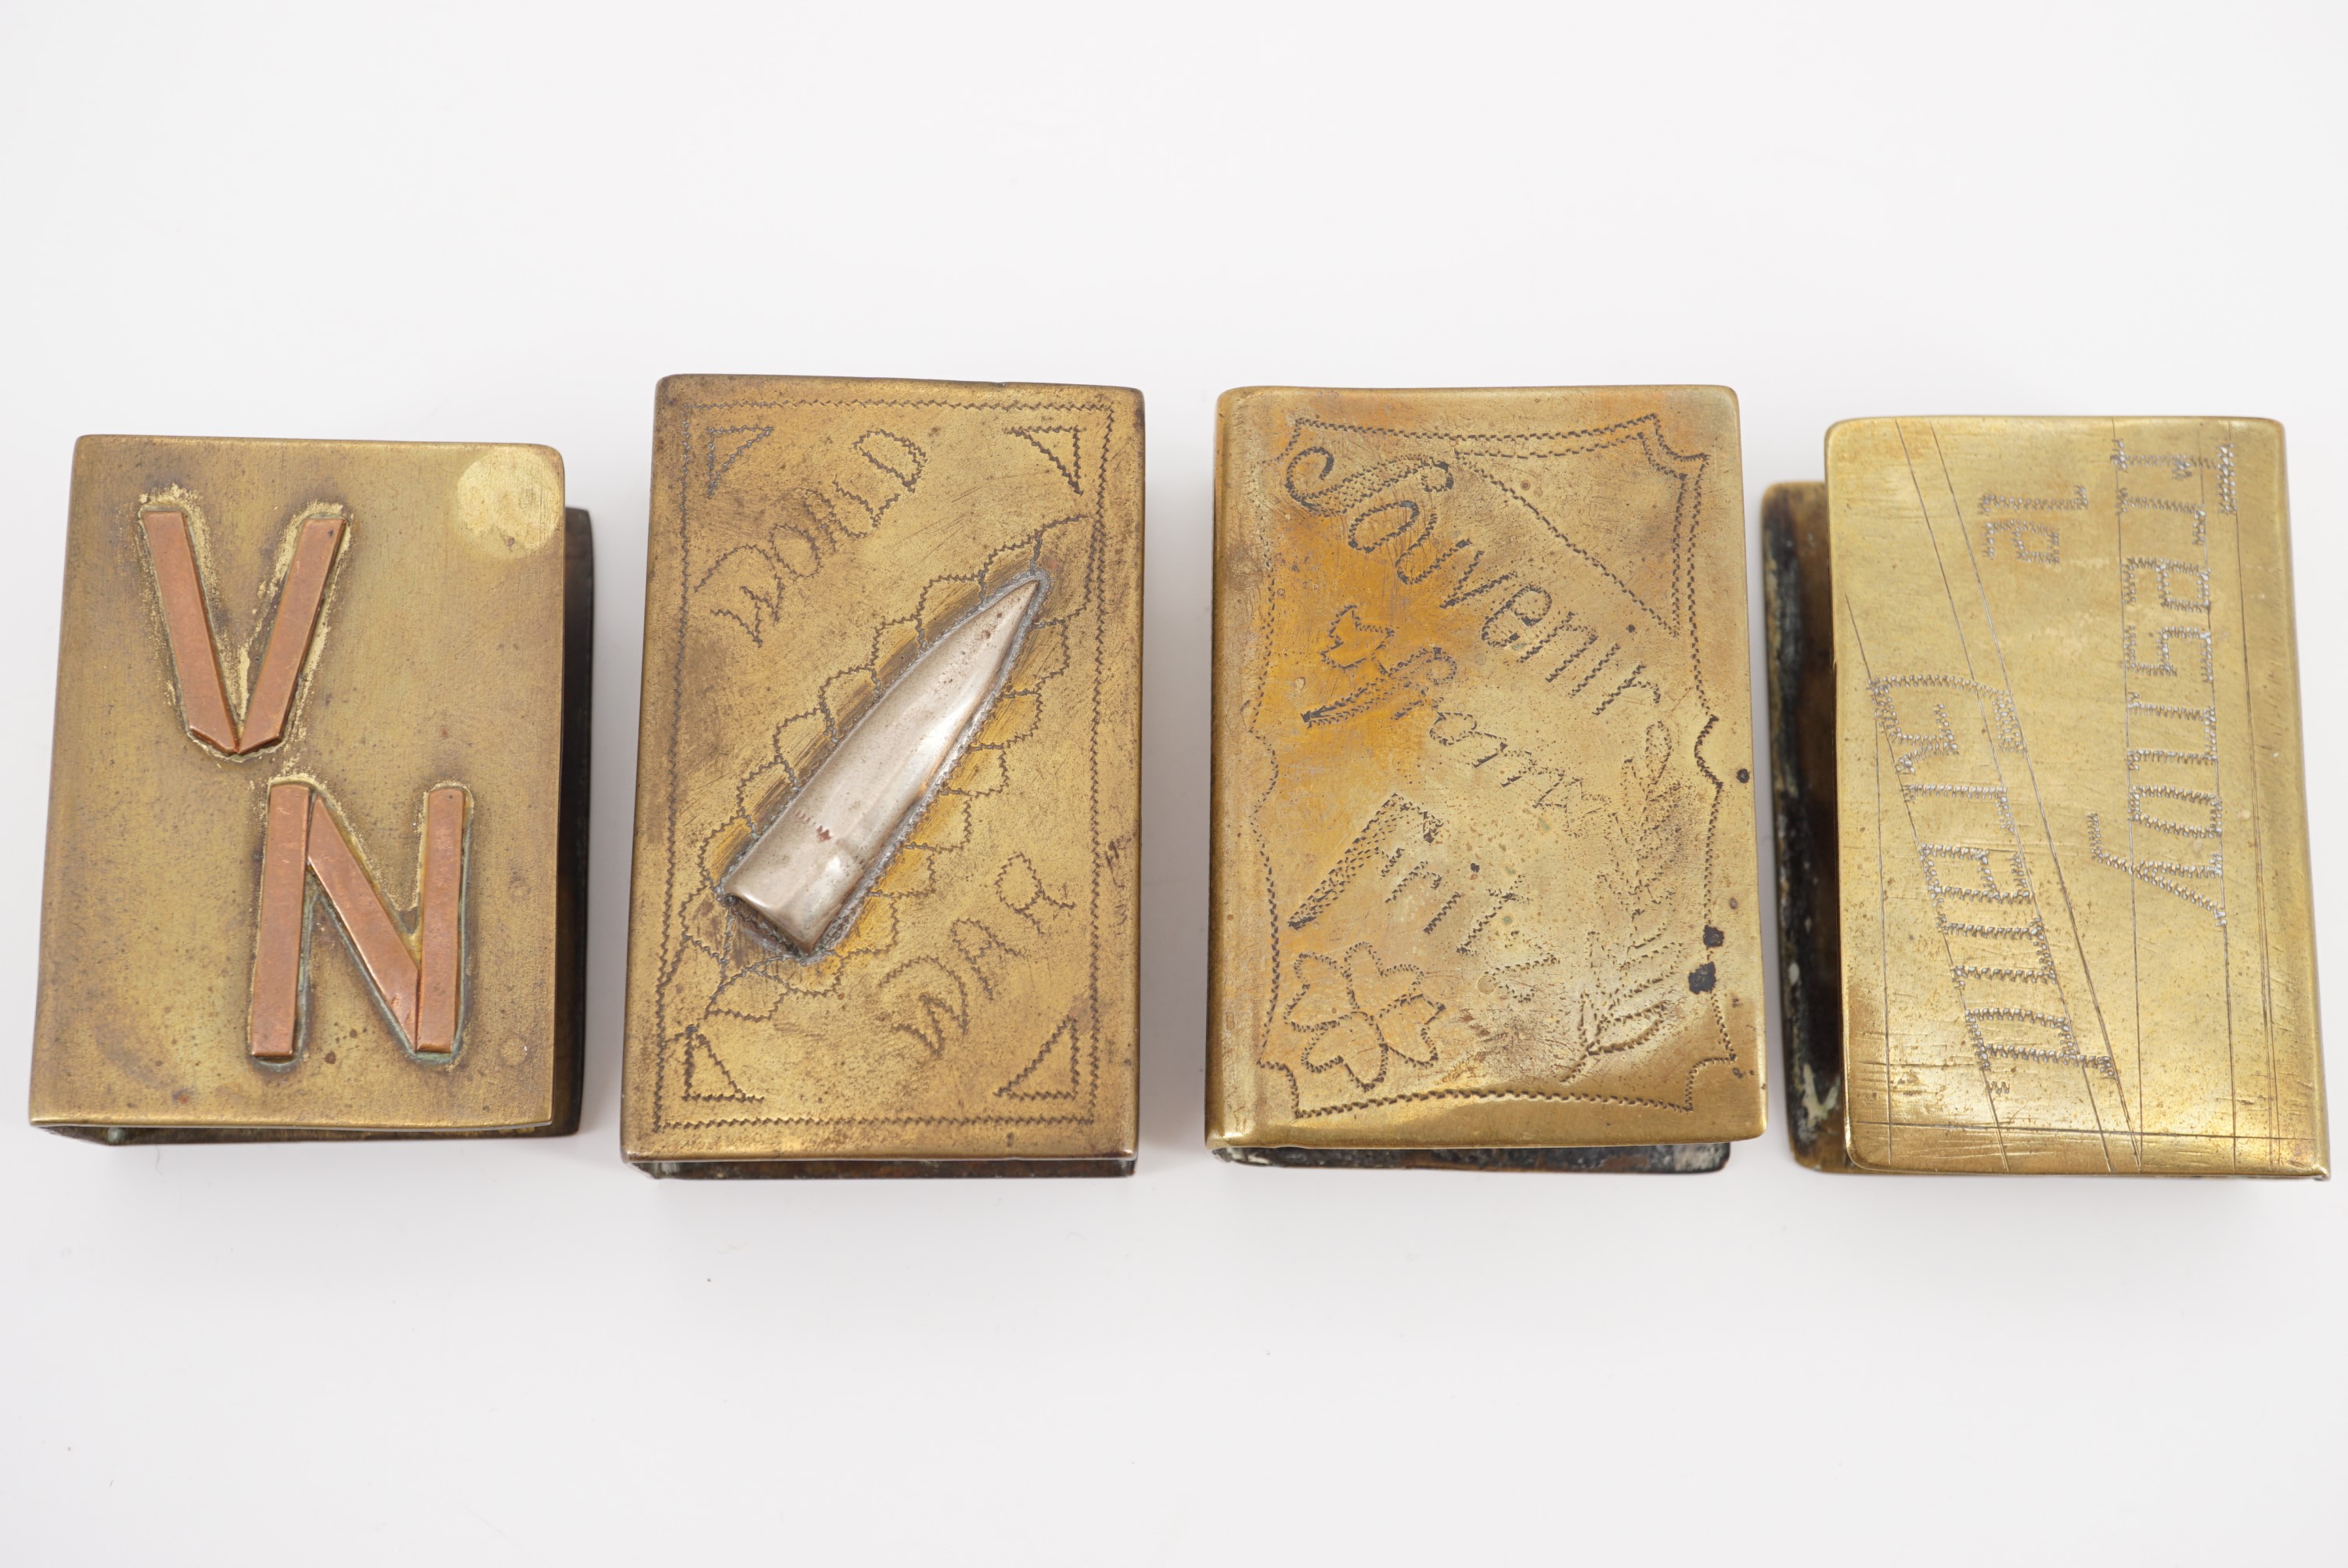 Four Great War hand-engraved brass trench art matchbox covers